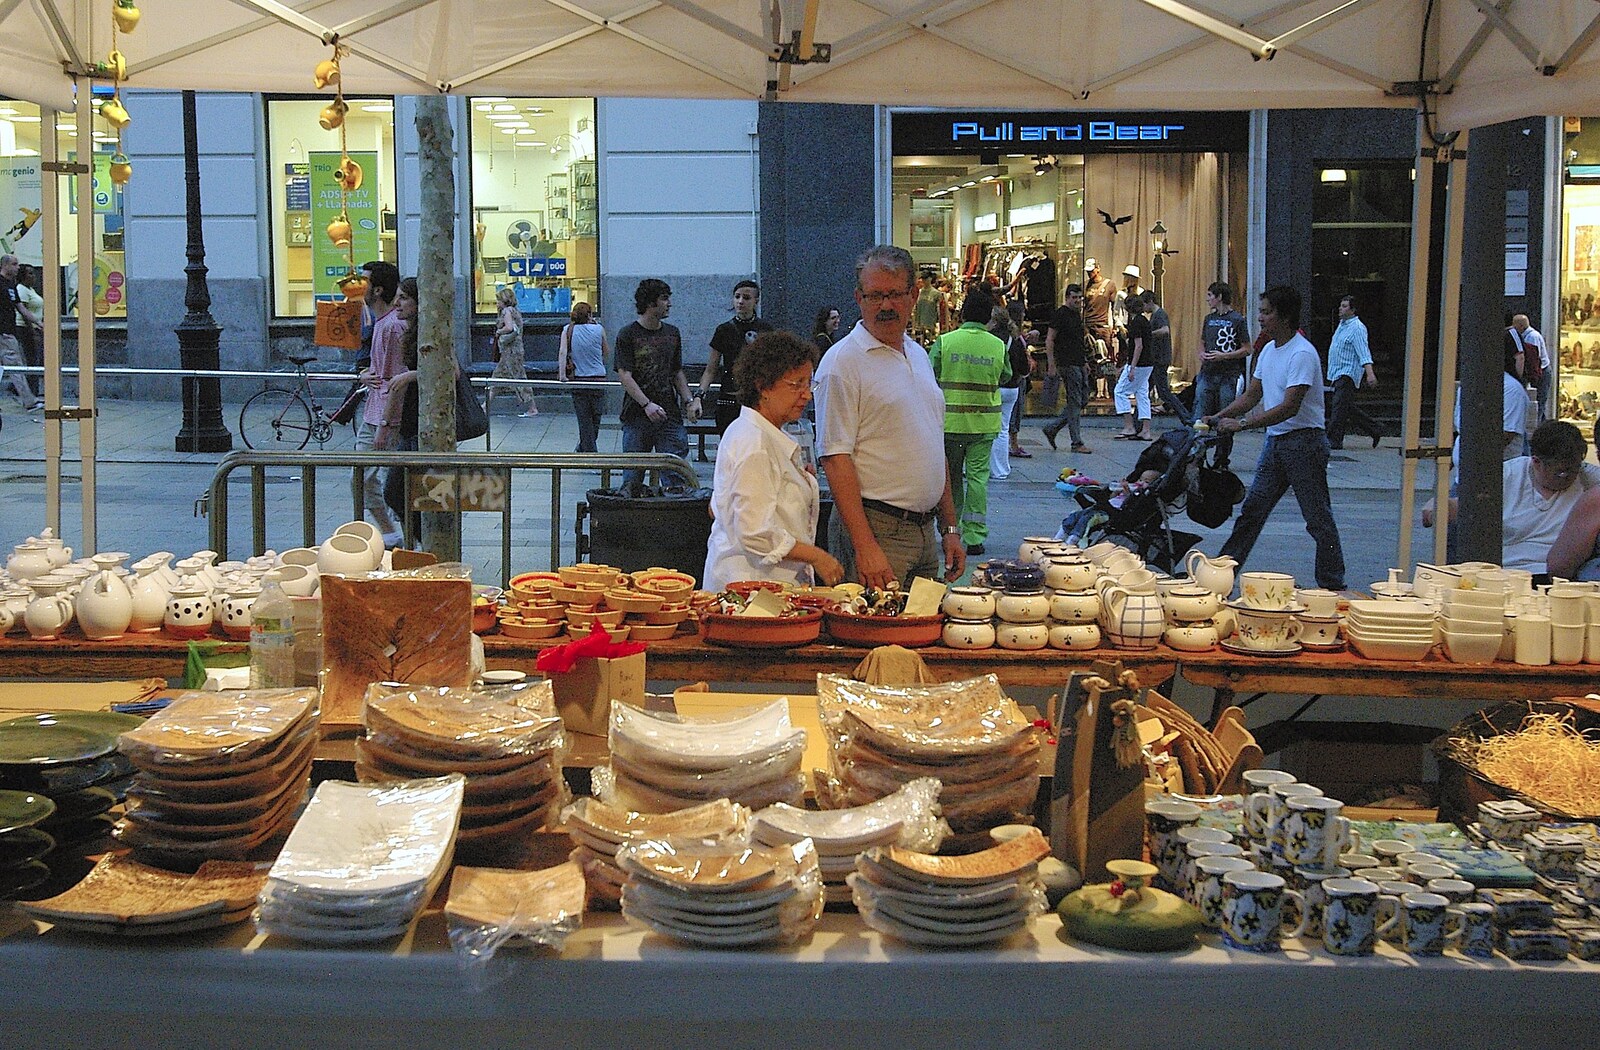 A crockery stall on La Rambla from Two Days in Barcelona, Catalunya, Spain - 22nd September 2006